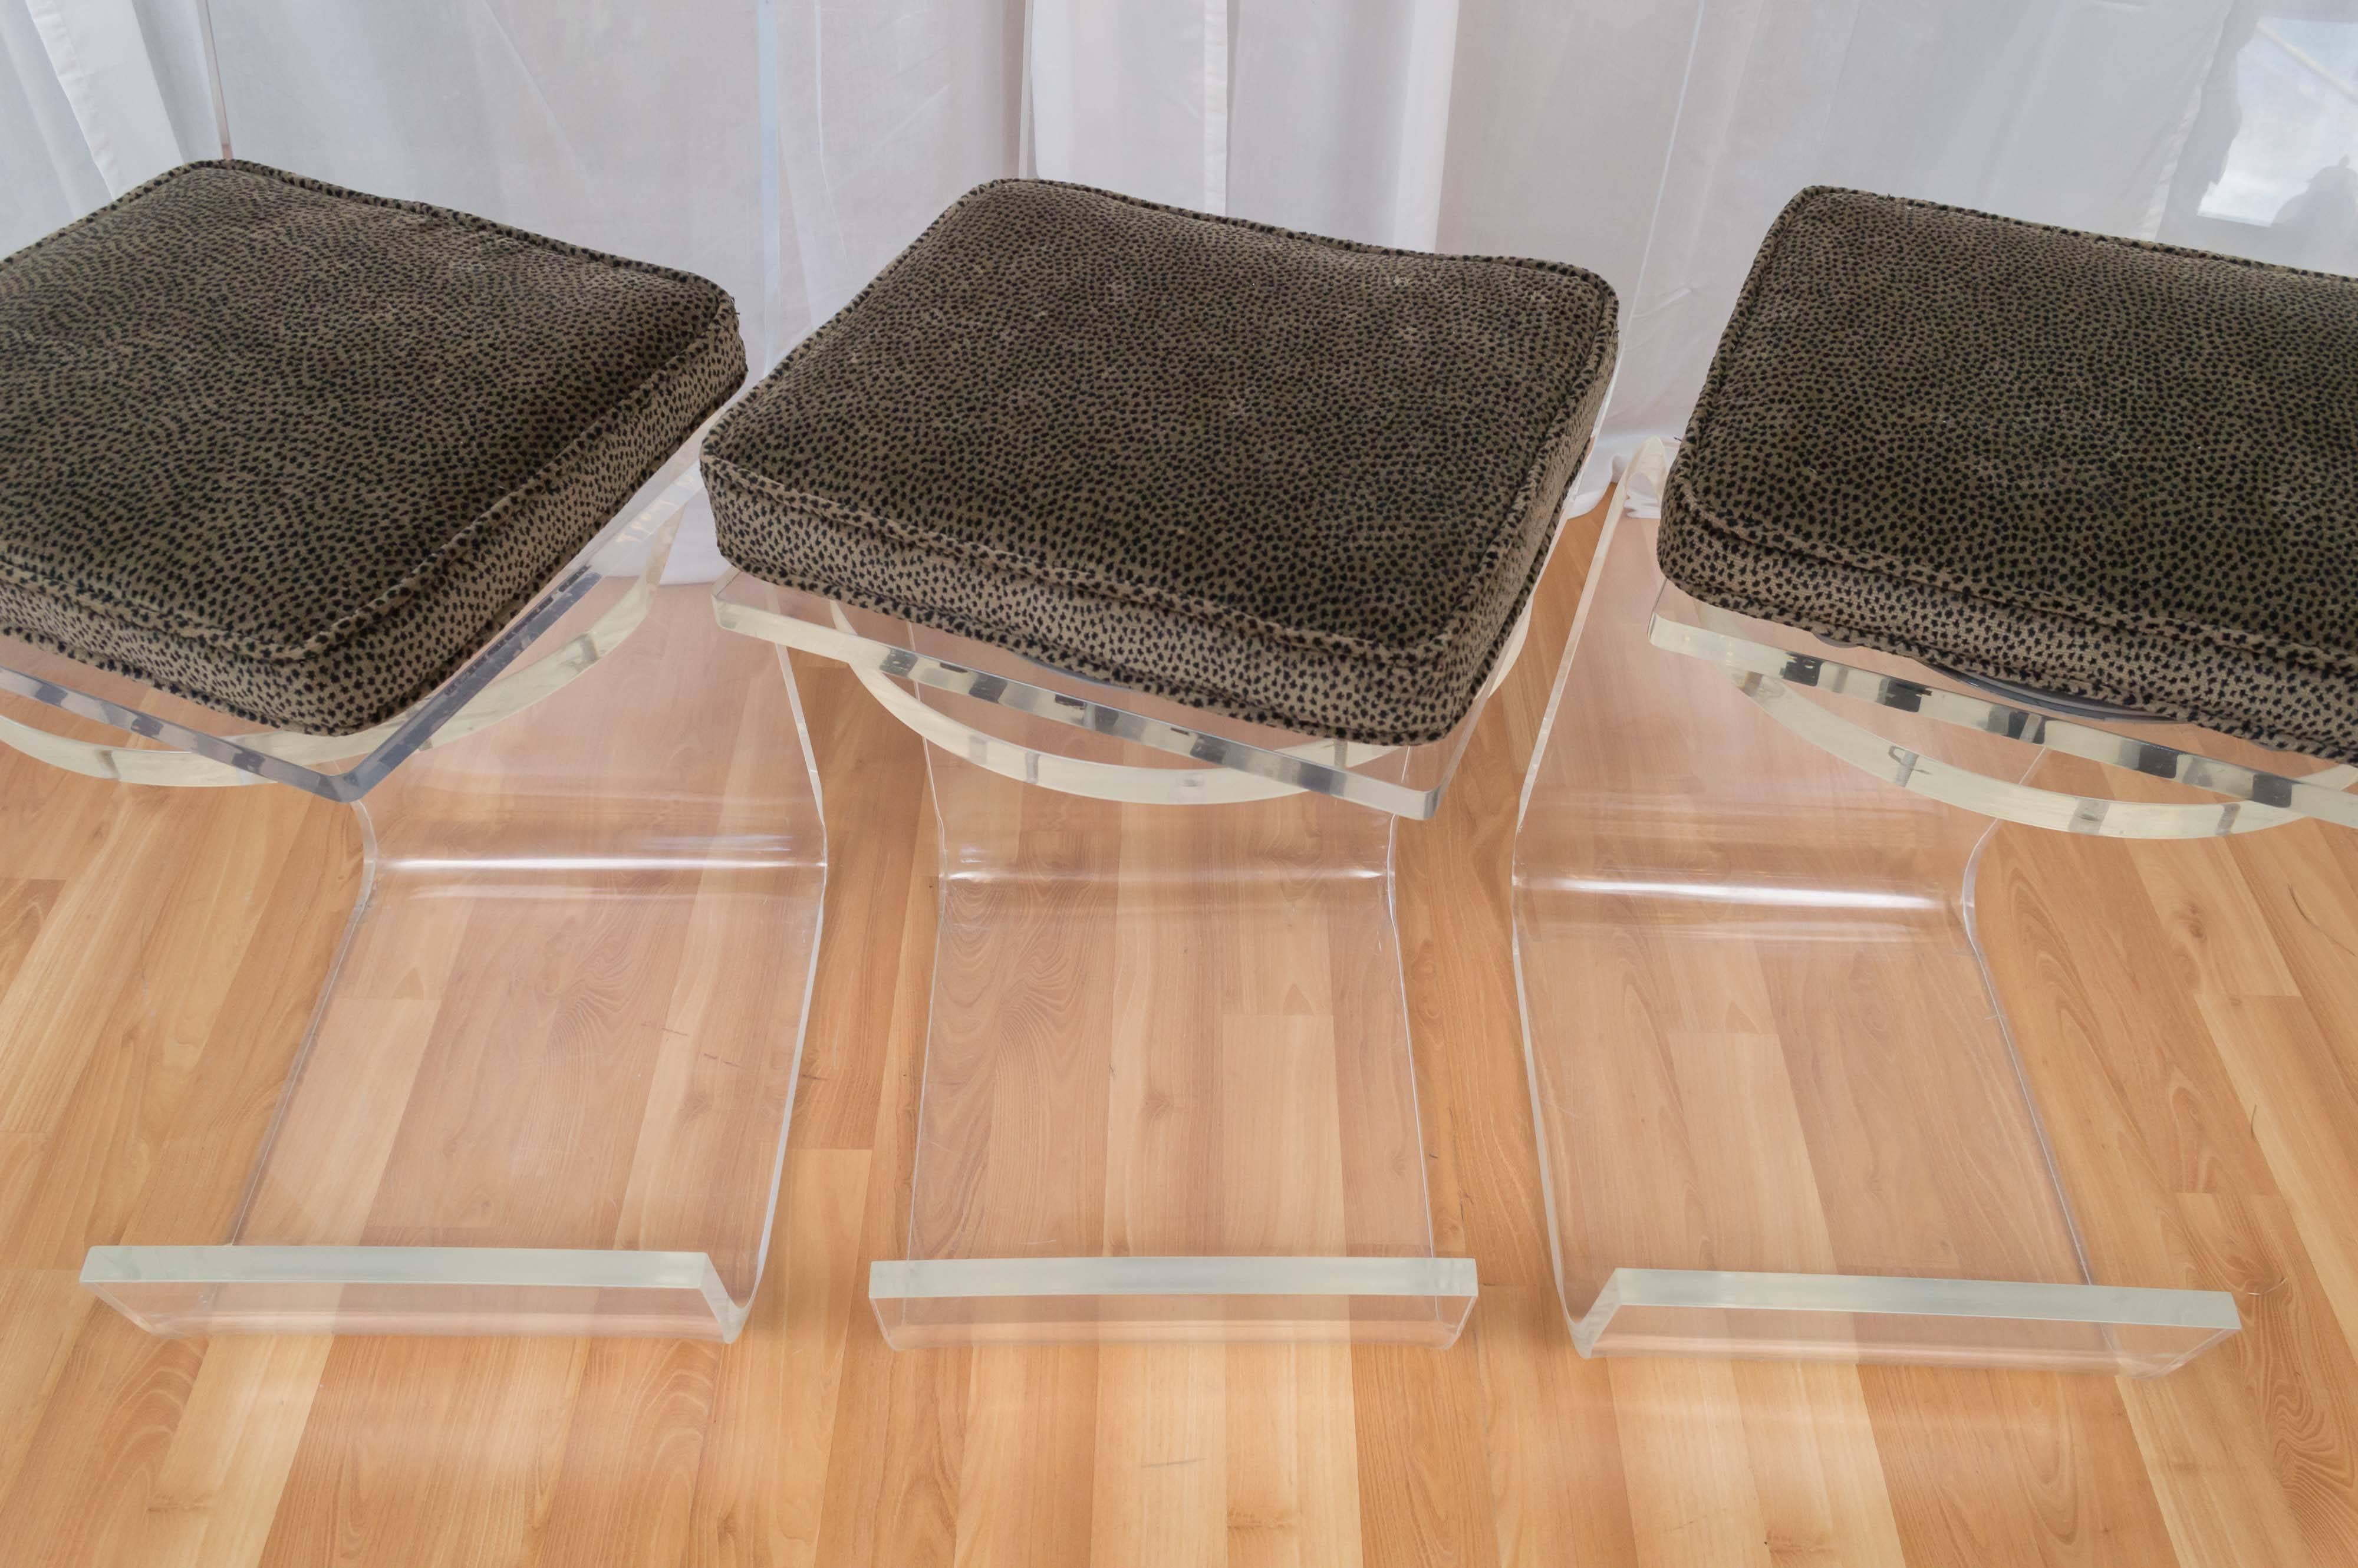 Late 20th Century Set of 3 Lucite Swivel Counter-height Bar Stools in the Manner of Paul M. Jones